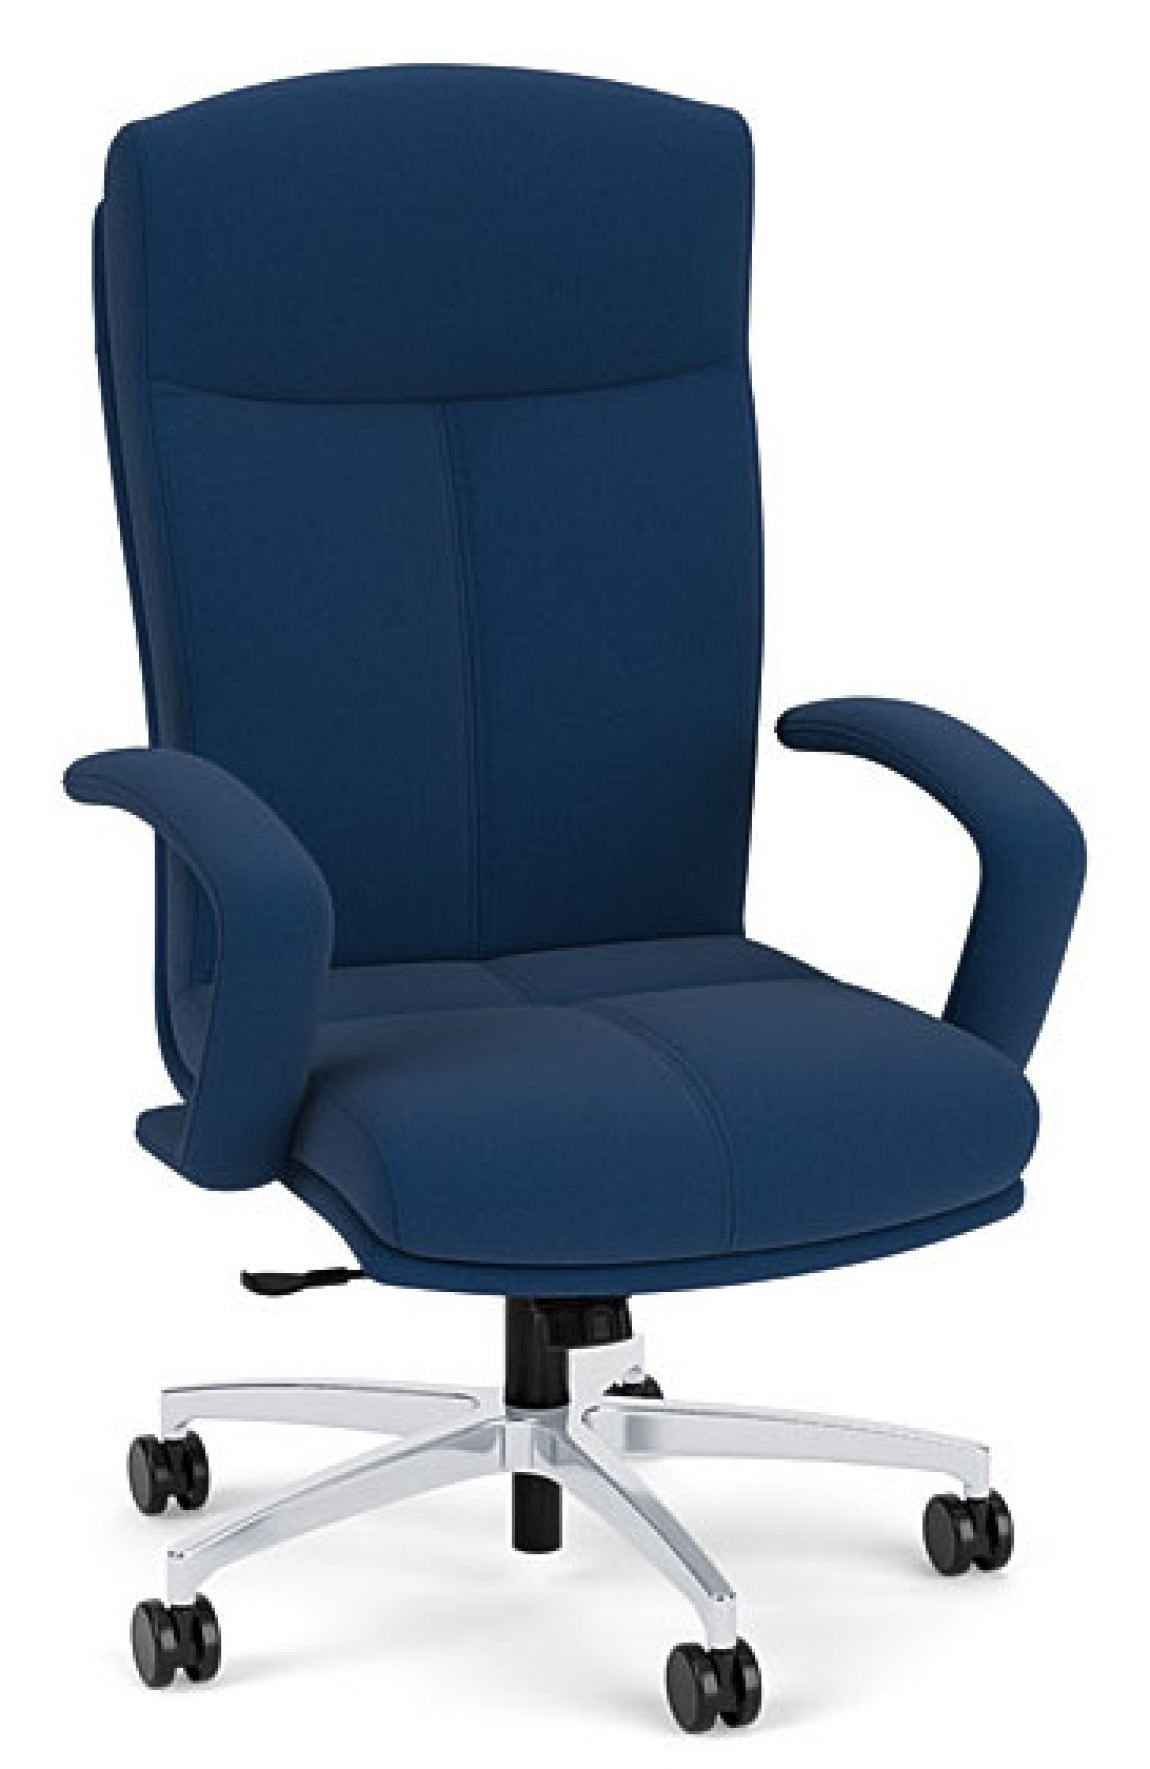 Vinyl High Back Conference Room Chair